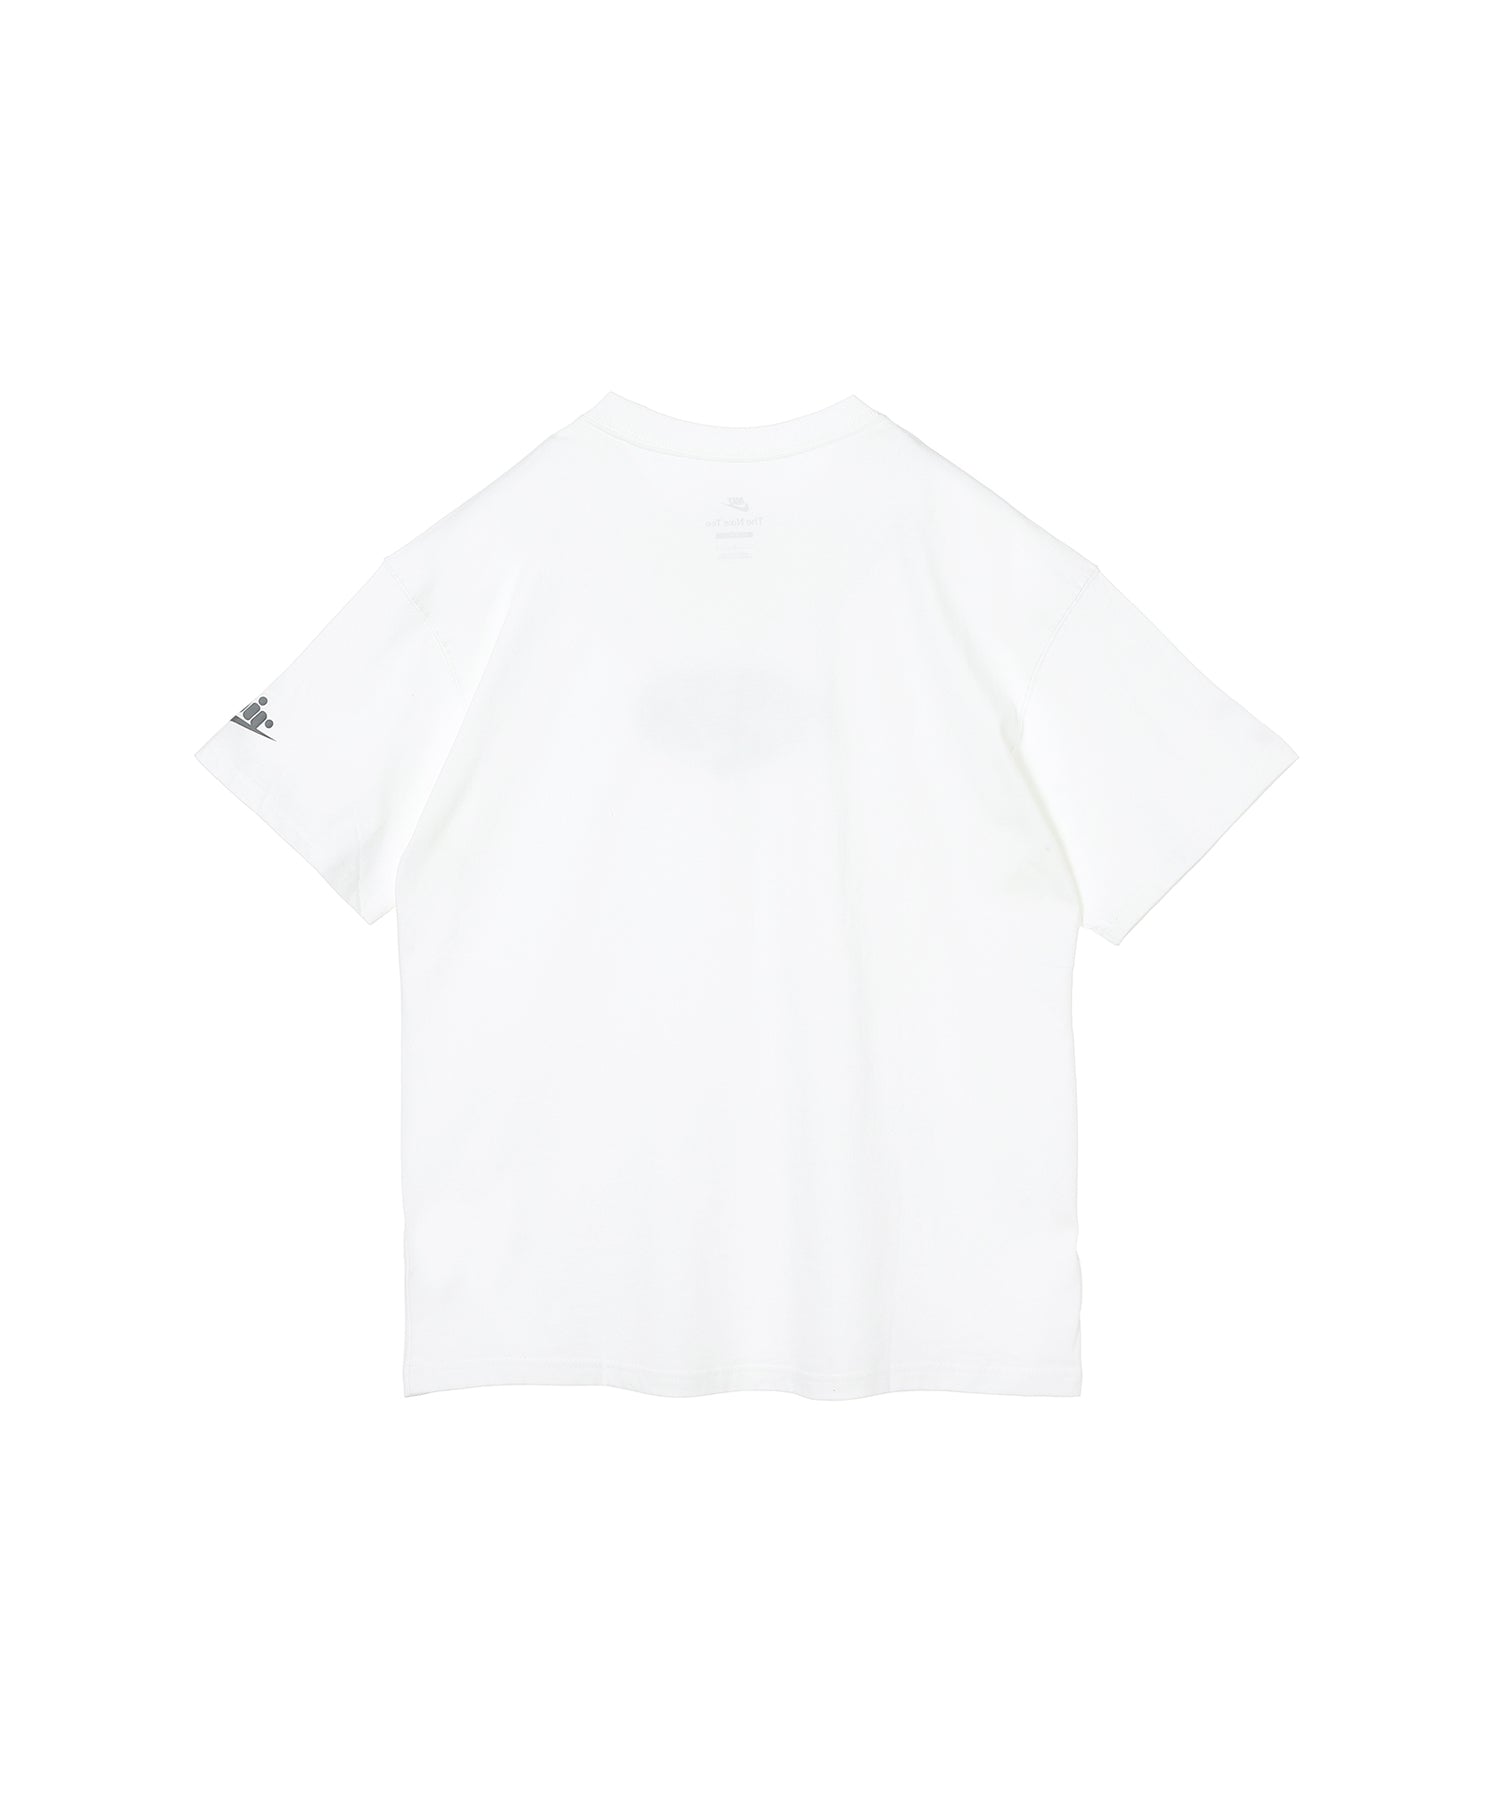 Nike Nsw M90 Am Day Lbr S/S Tee